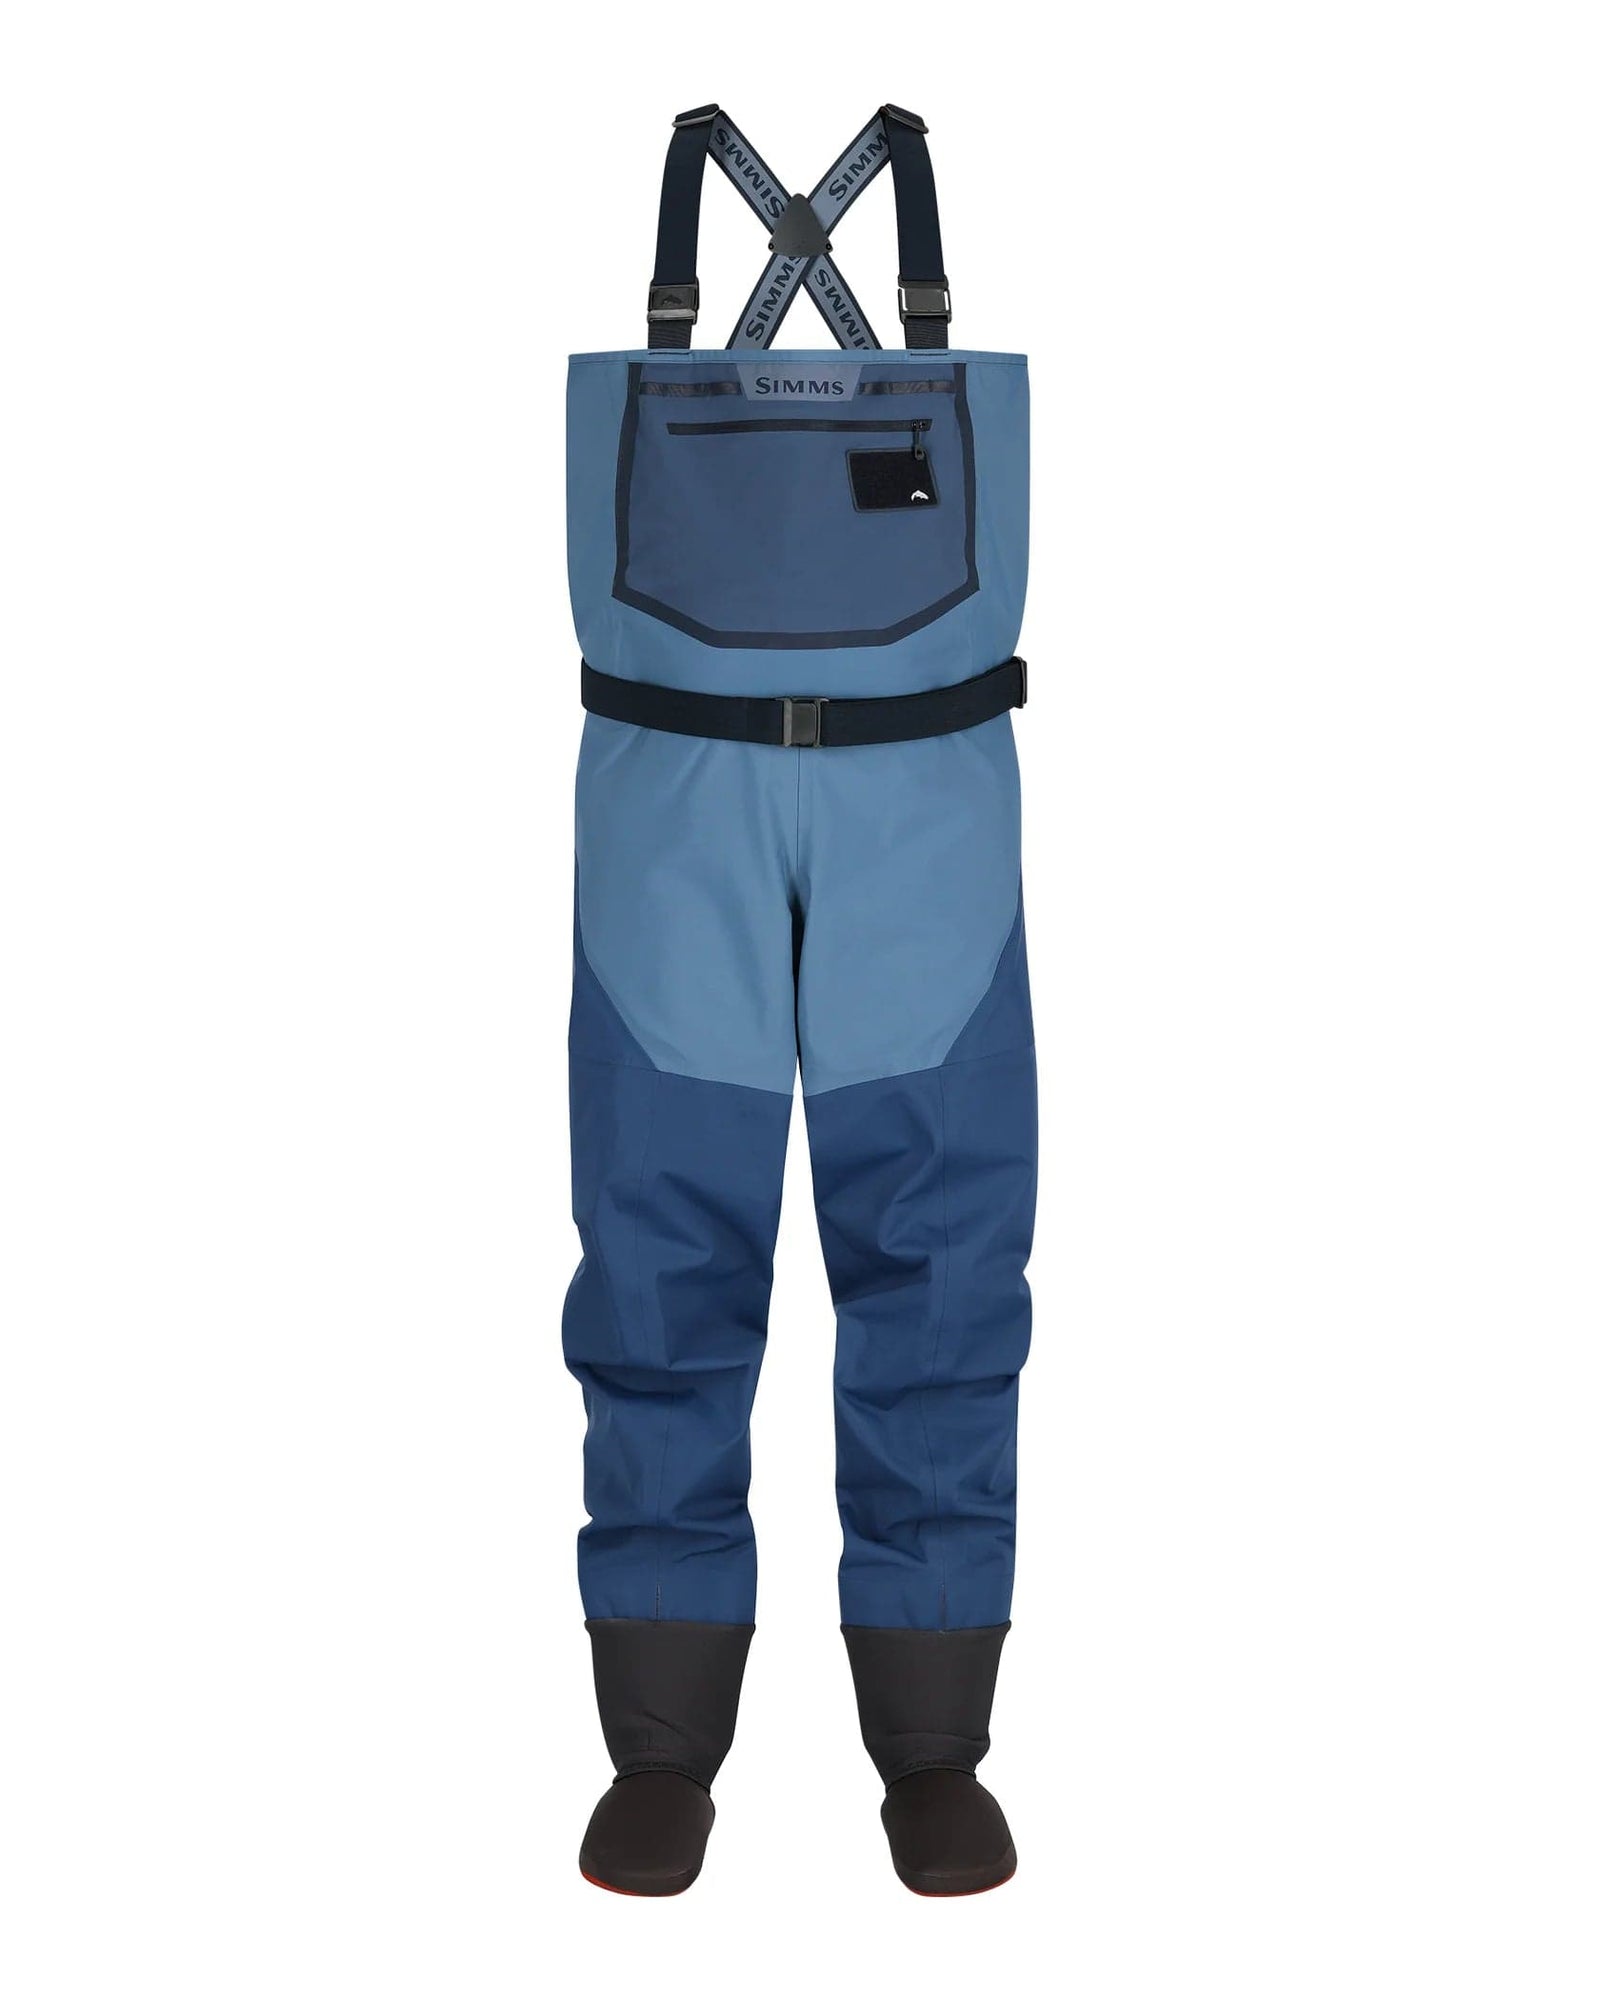 Stocking Foot Waders - The Saltwater Edge